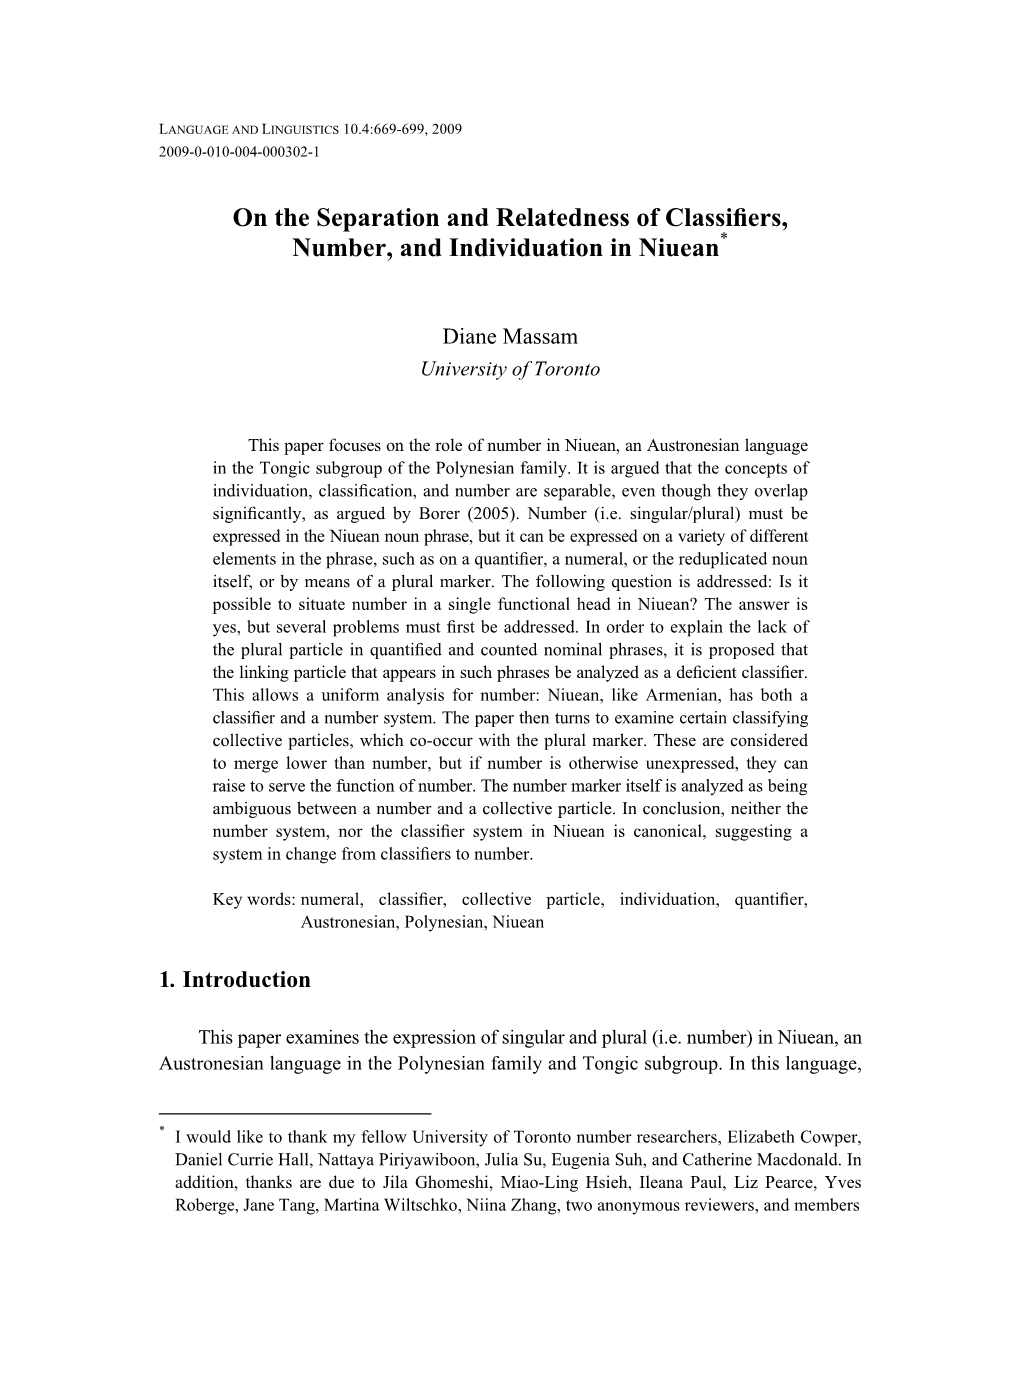 On the Separation and Relatedness of Classifiers, Number, and Individuation in Niuean